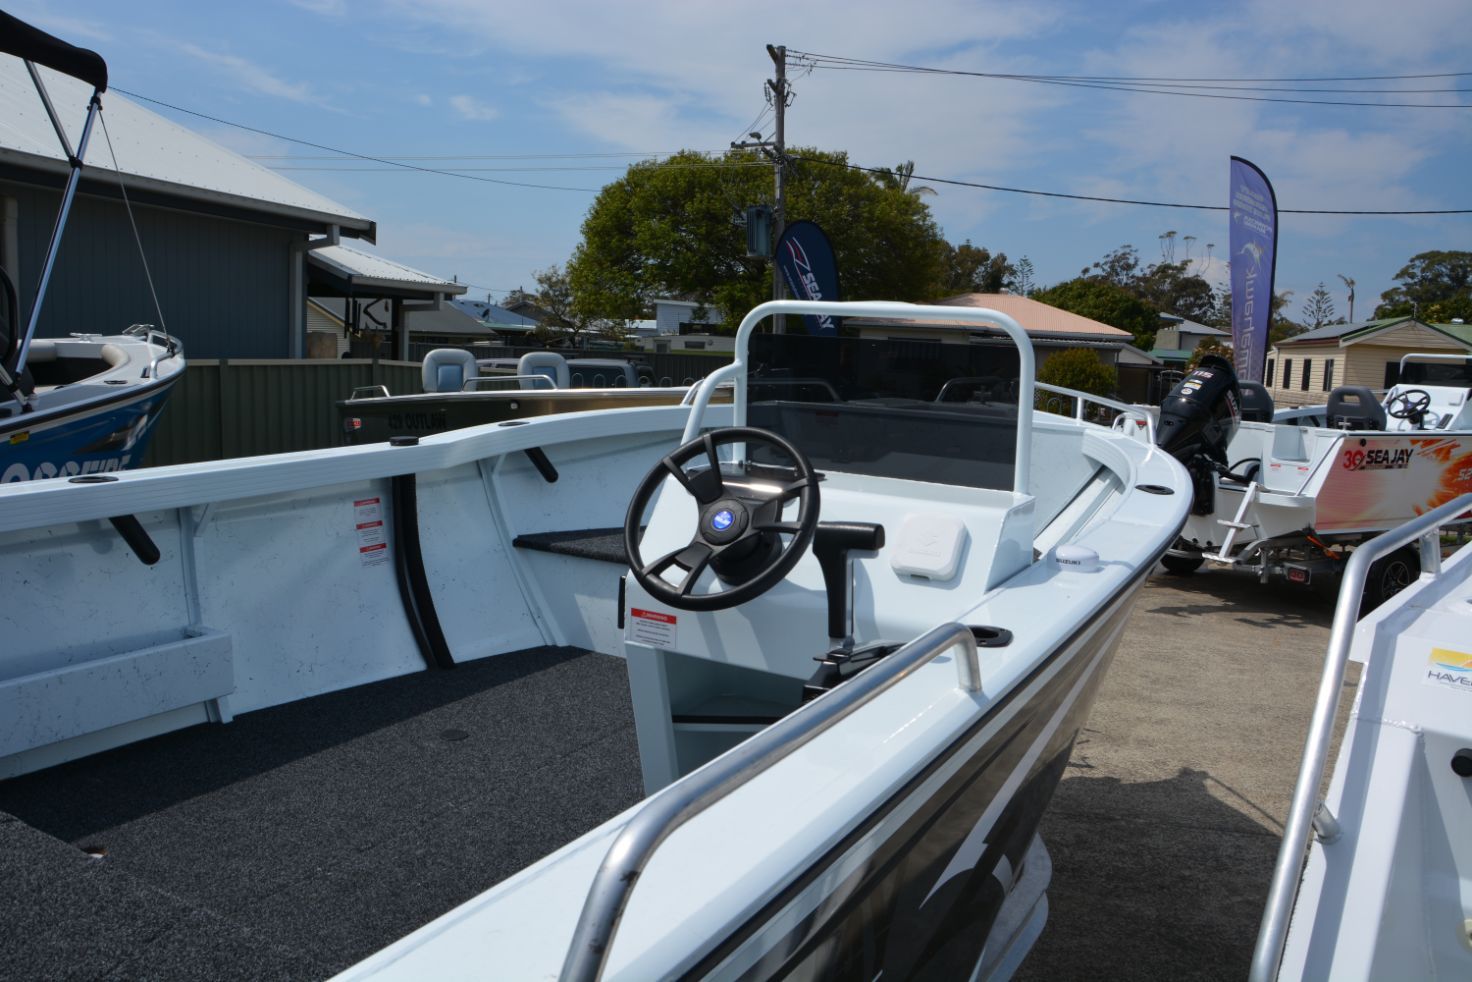 Sea Jay 468 Avenger Sports RS — Boat Sales in Port Macquarie, NSW